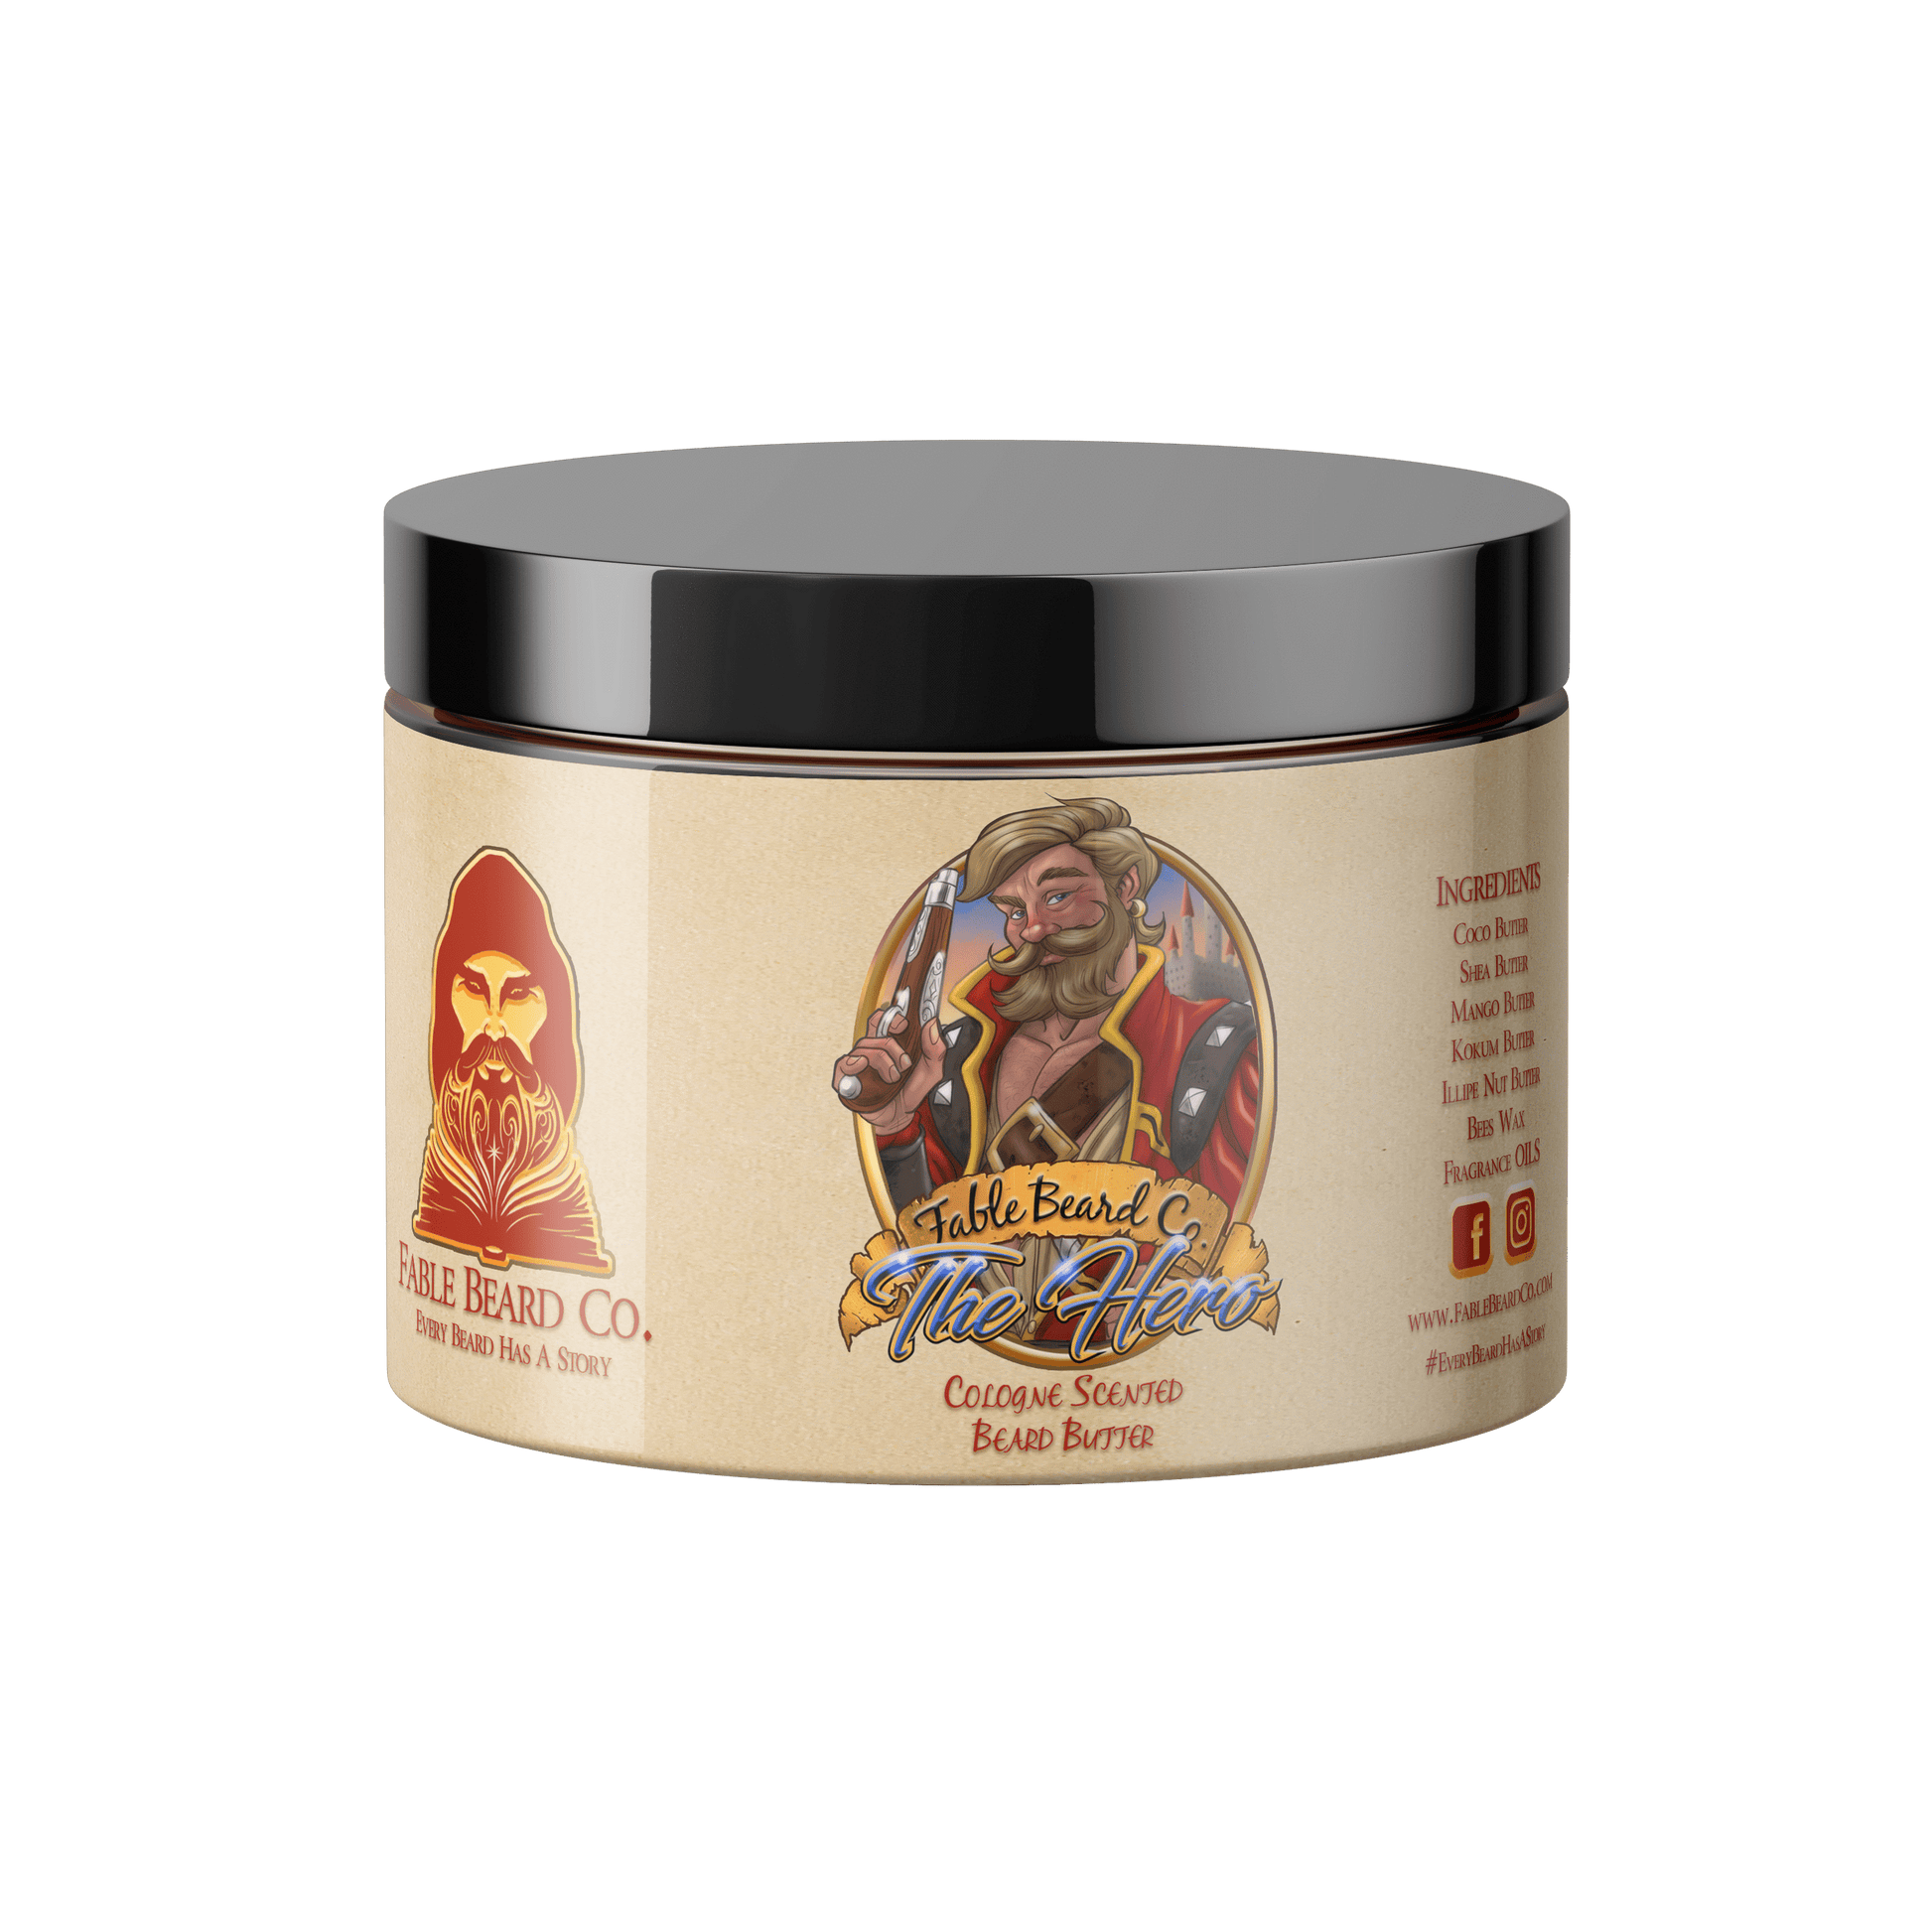 Fable Beard Co. Beard Butter 4oz Tub The Hero - A Cologne Scented Beard Butter